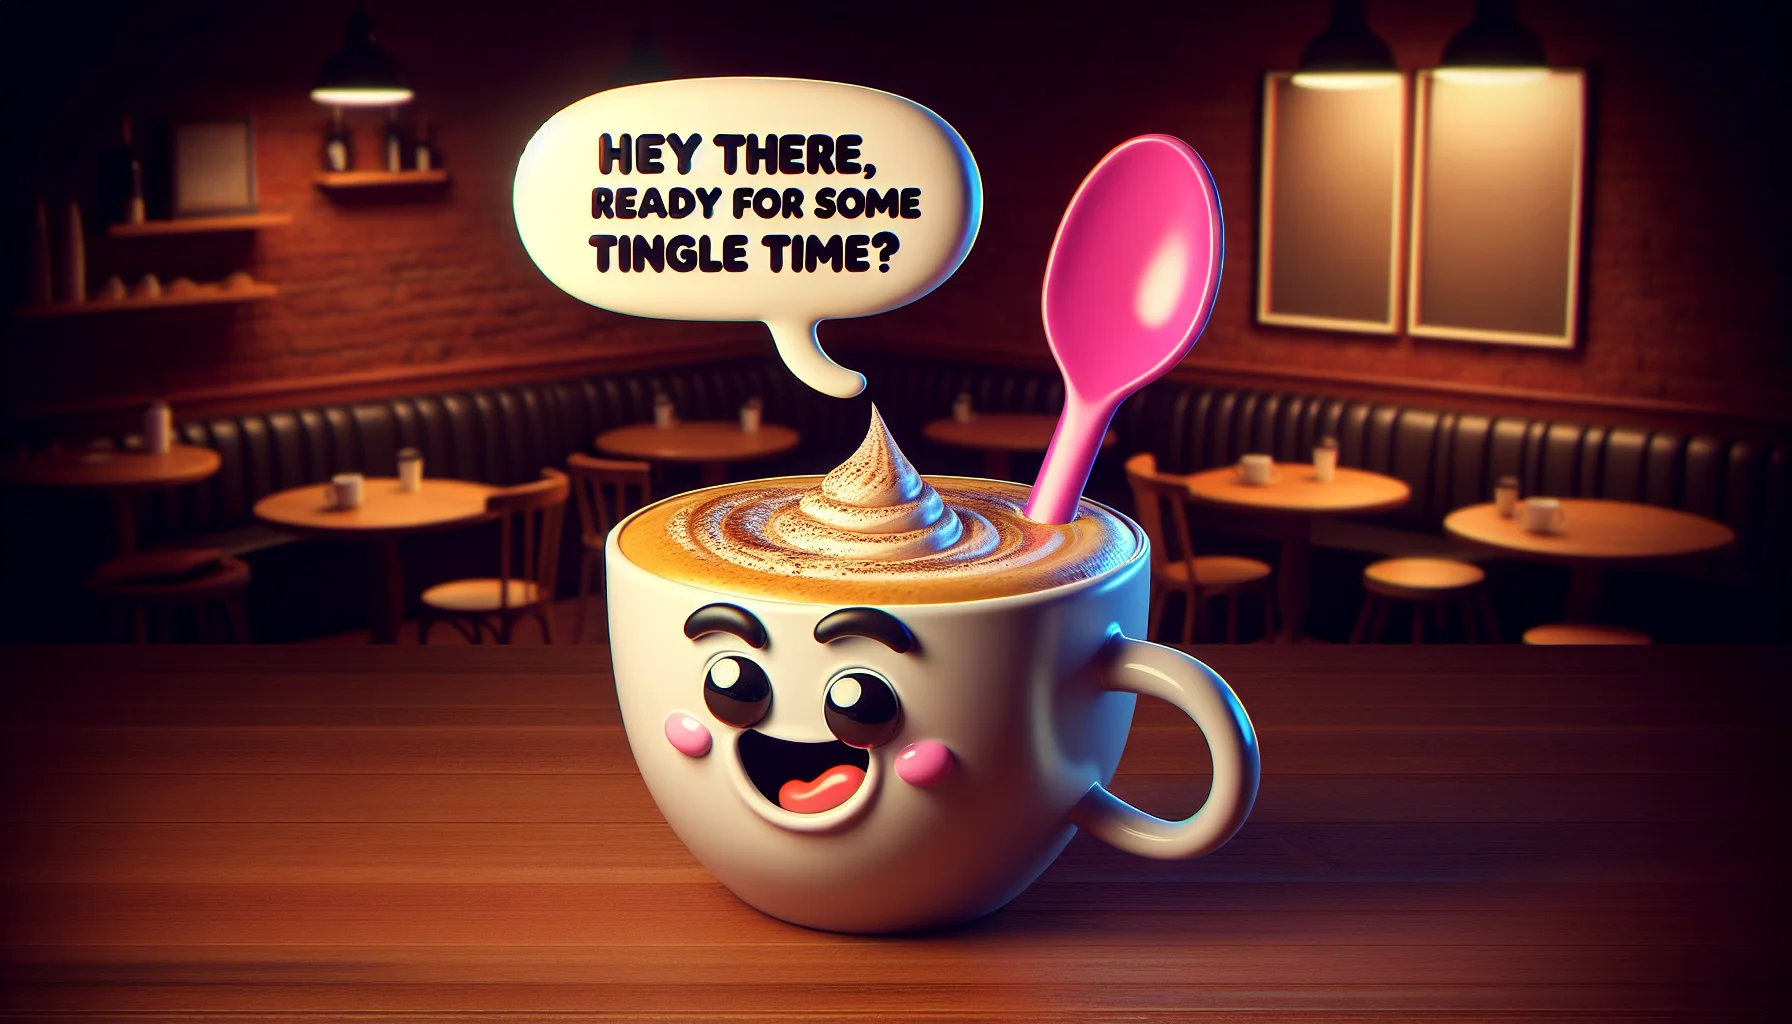 Create a humorous and realistic image featuring an anthropomorphic cup of ASMR latte with a mischievous expression. It is stirring itself with a vibrant, oversized spoon. The cup has a speech bubble coming from it, saying, 'Hey there, ready for some tingle time?'. In the background, subtle hints of a cozy café environment, with other animated drinks laughing and other customers express an amalgam of surprise and amusement at the brazen confidence of the ASMR latte.